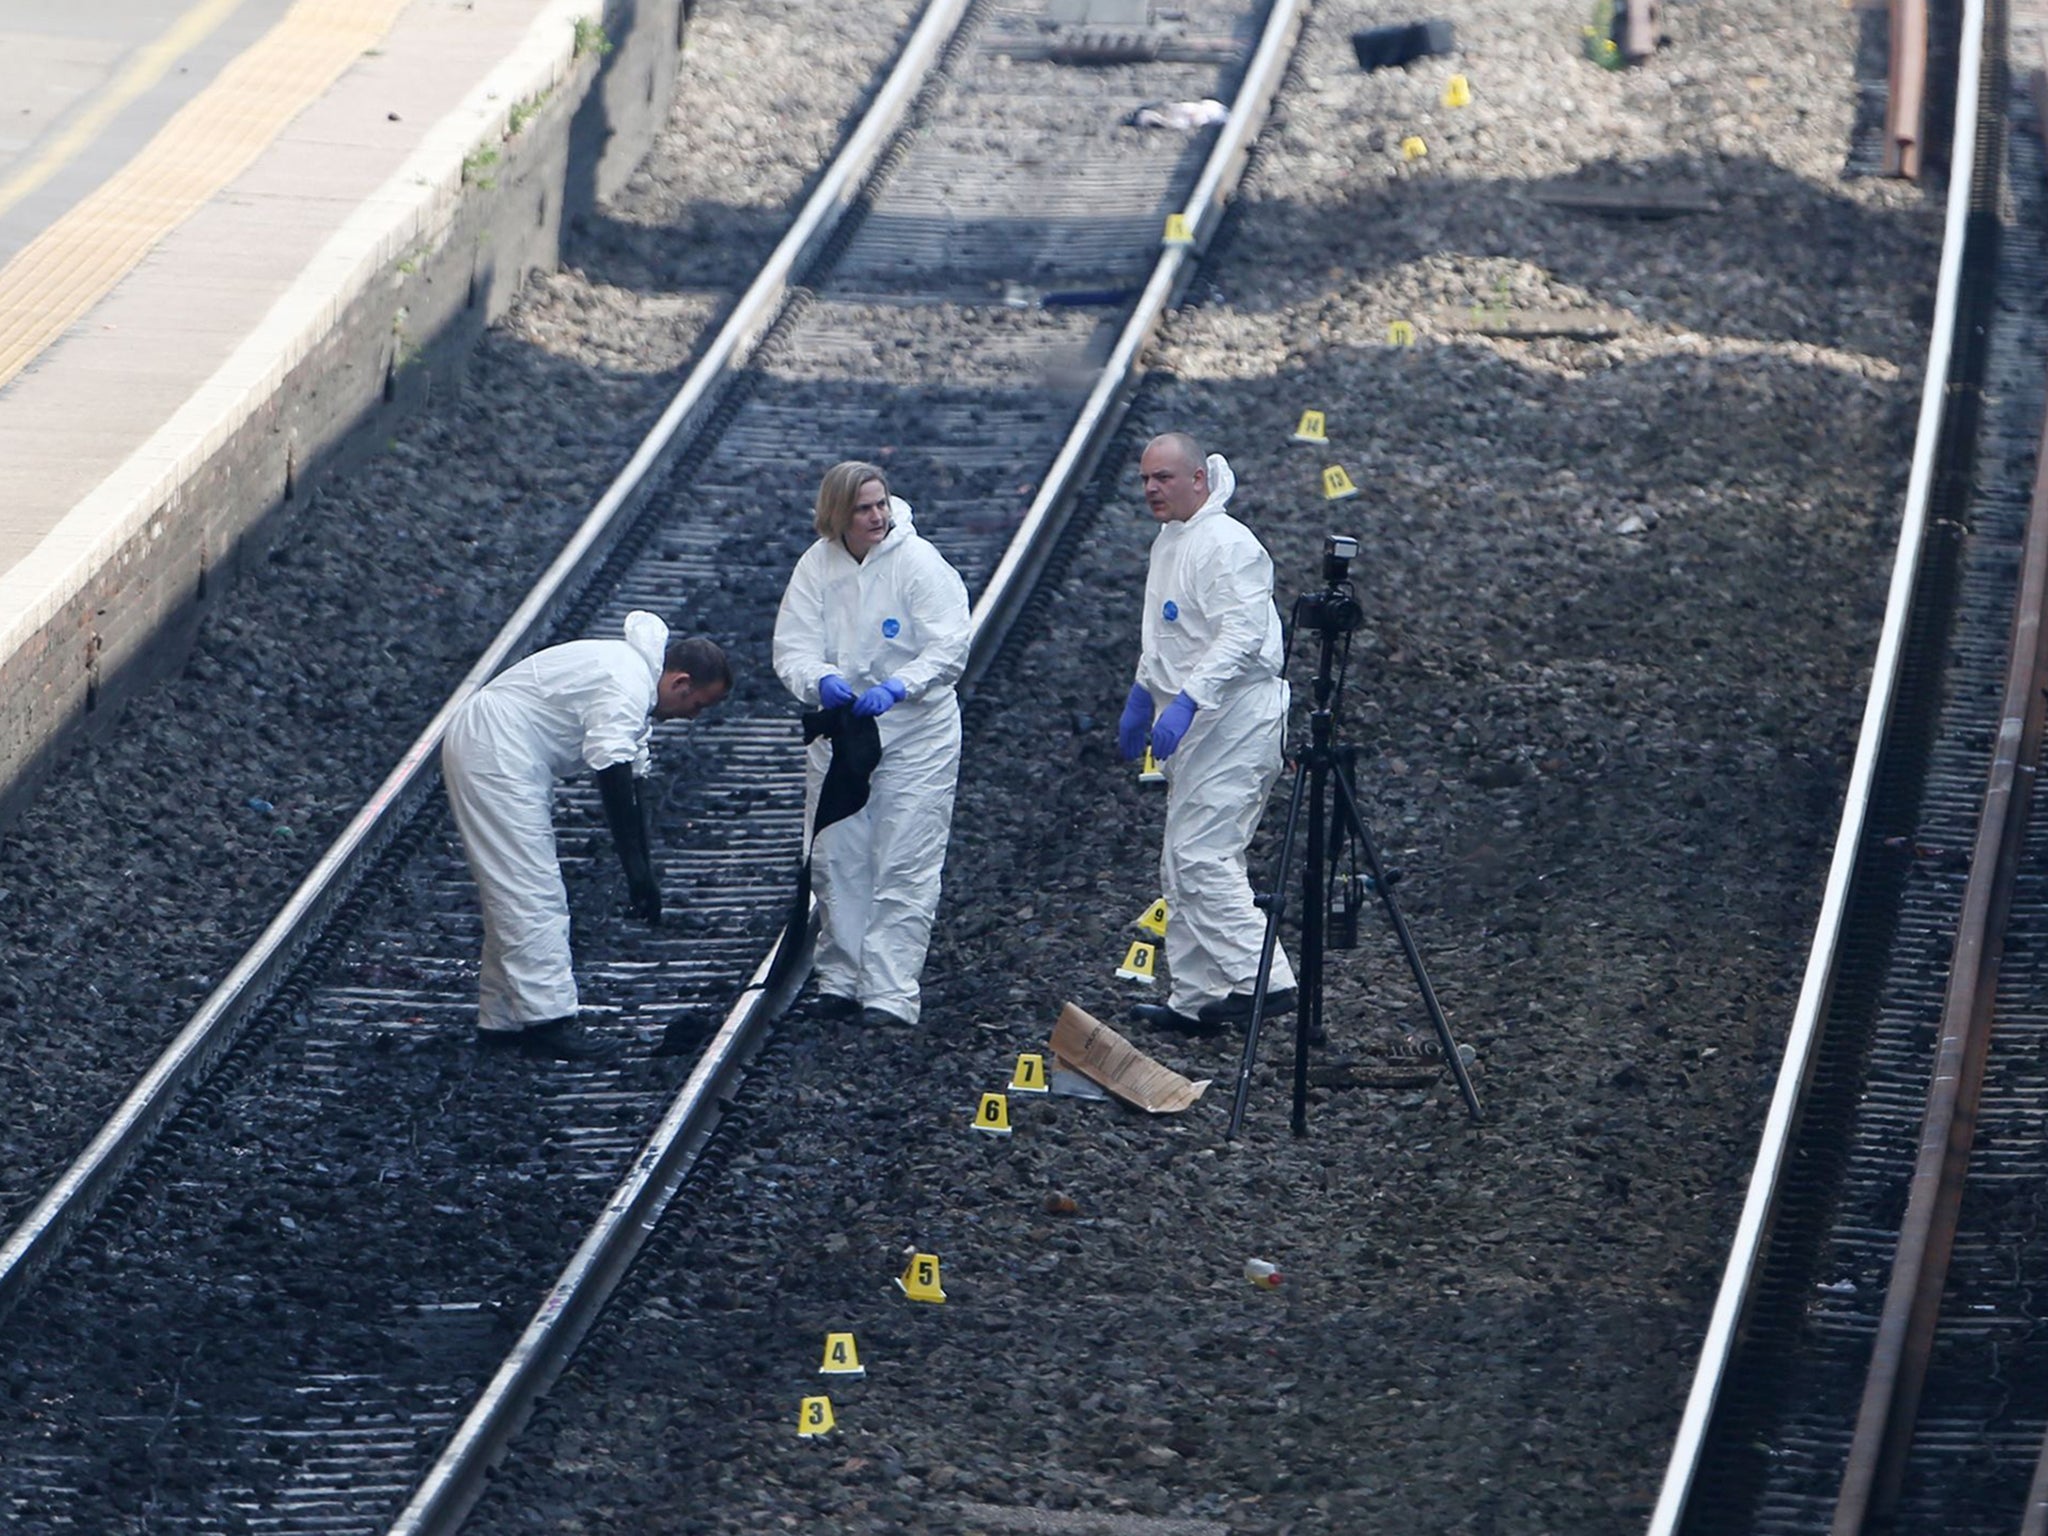 Forensic officers work on the tracks at Slough train station after a woman and a child died after being struck by a train at the station